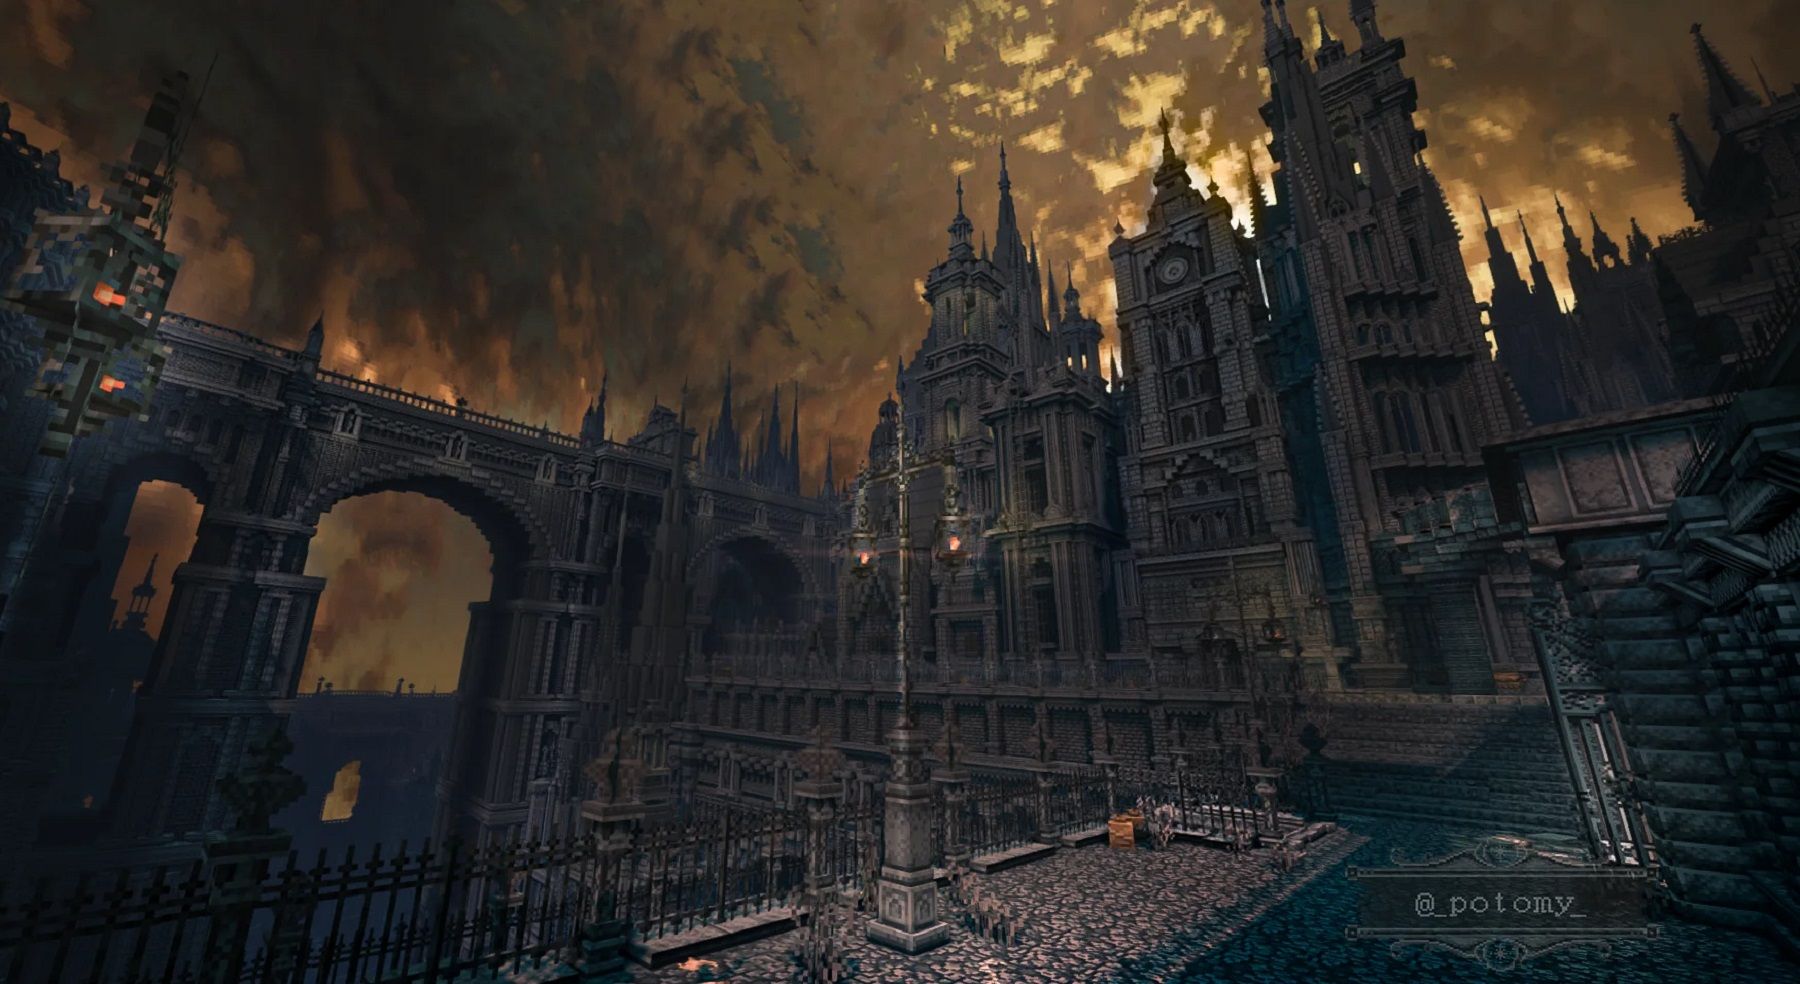 Minecraft screenshot showing a highly detailed recreation of the city of Yharnam from Bloodborne.